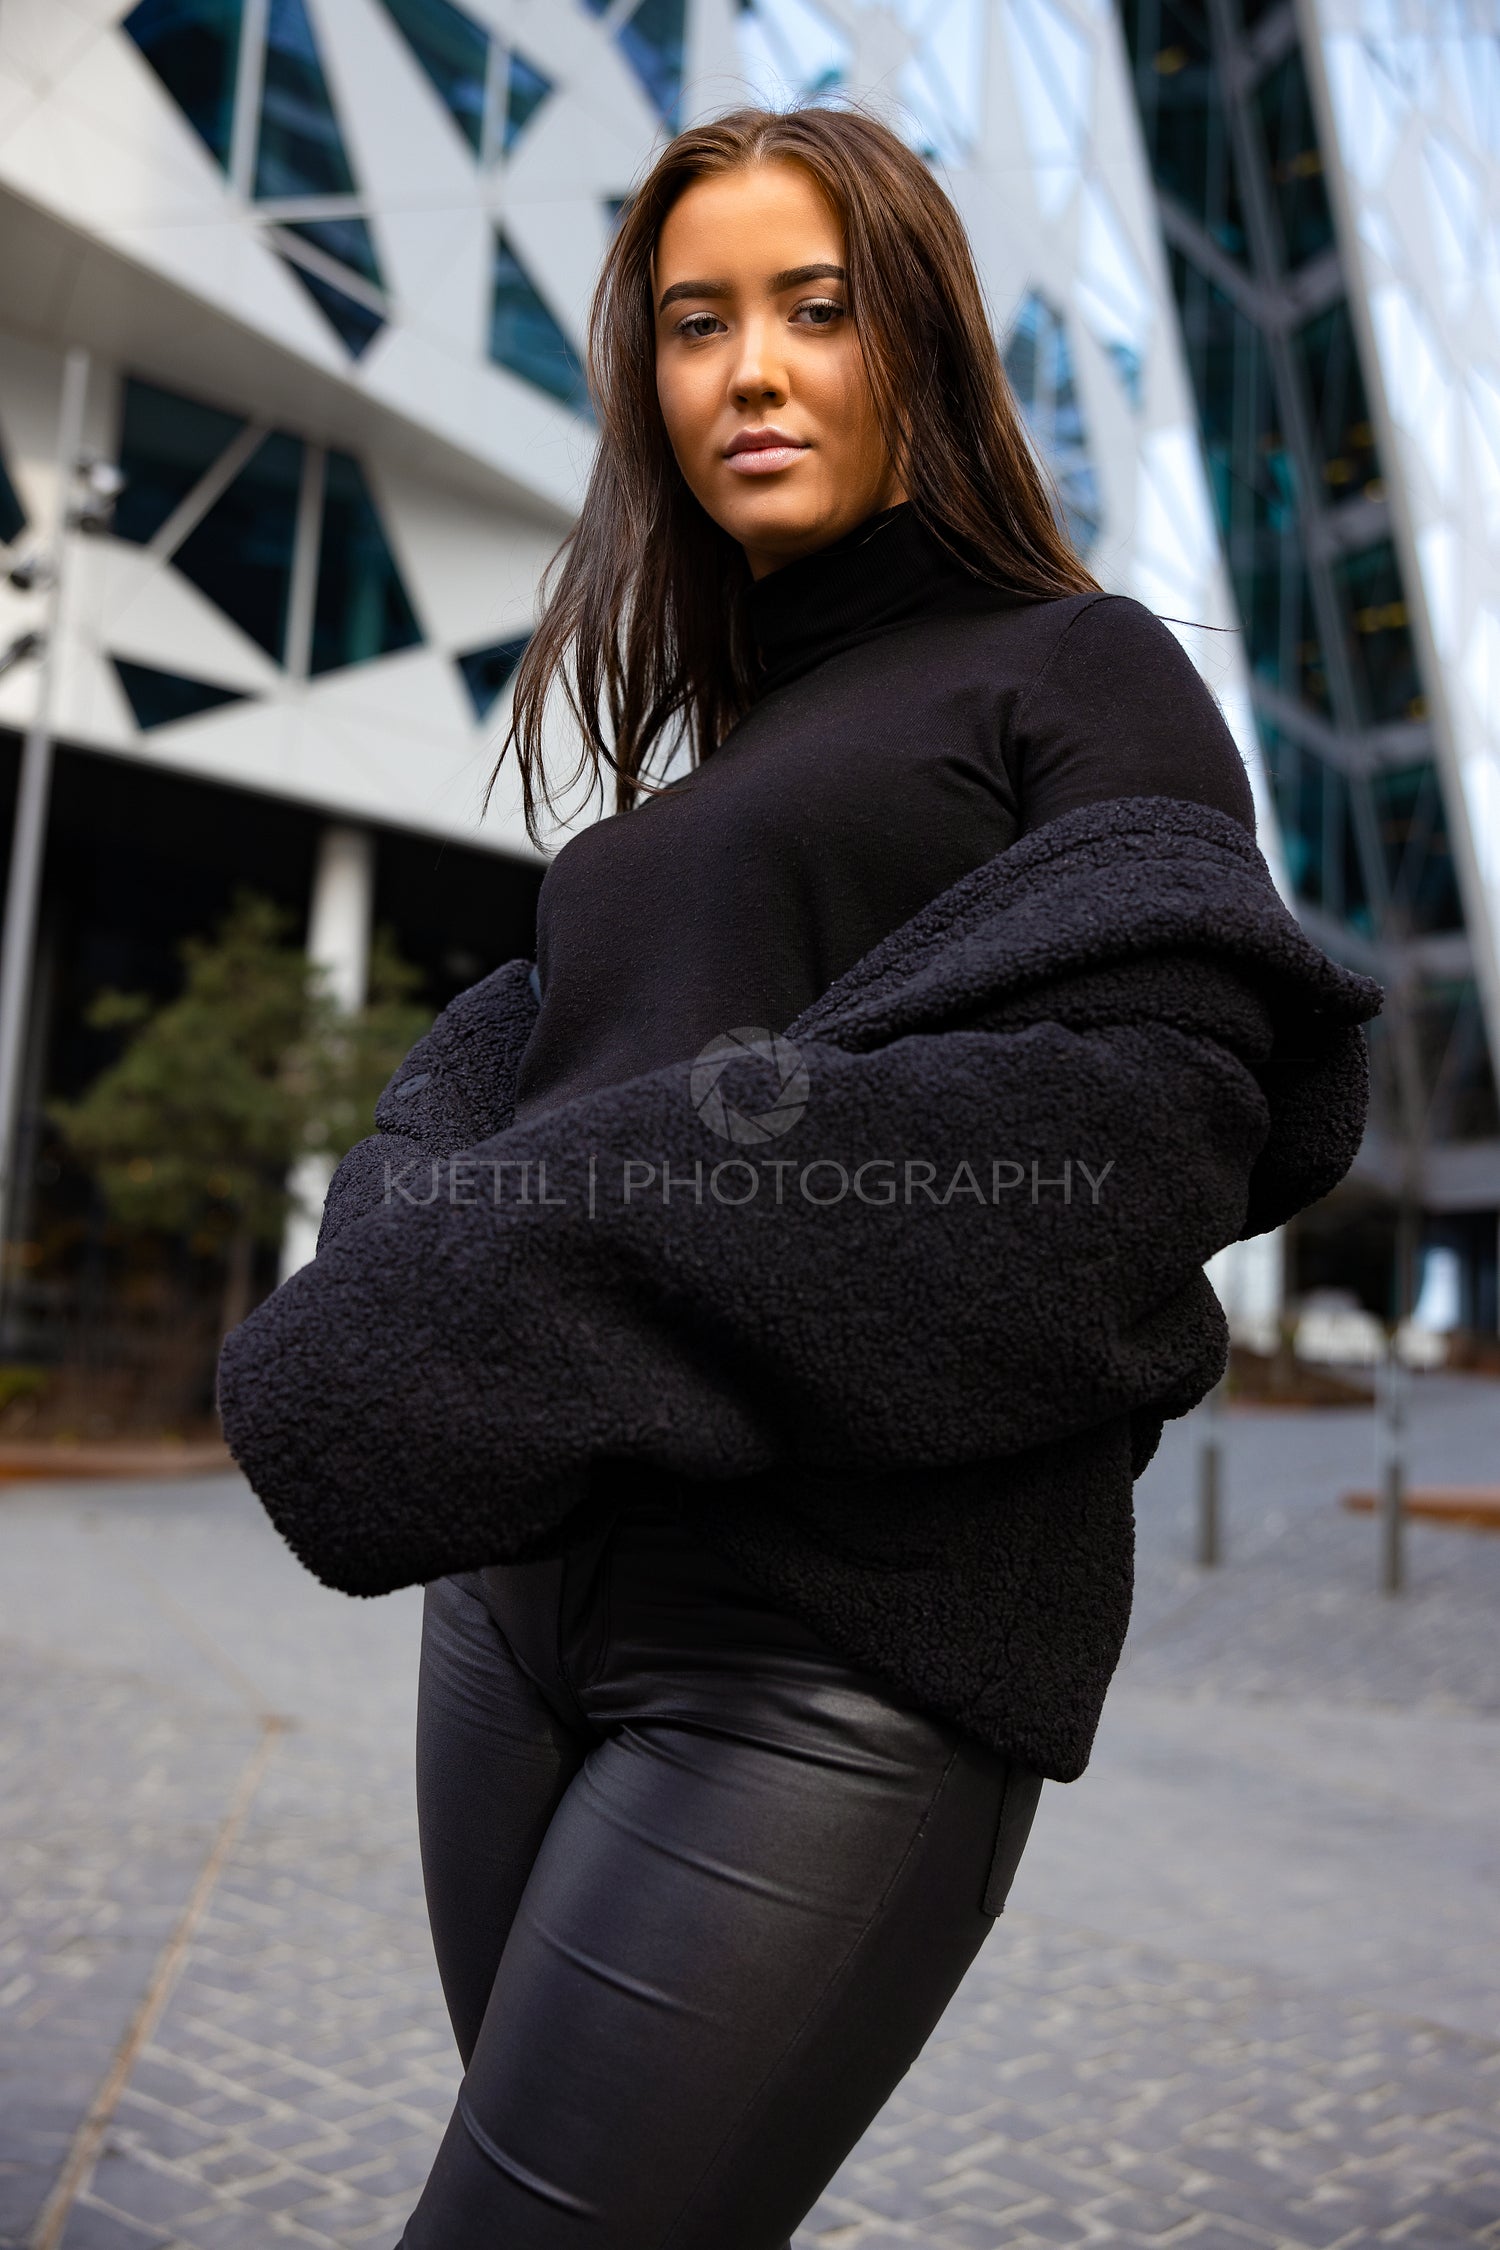 Environmental Portrait Of Attractive Young Woman In City